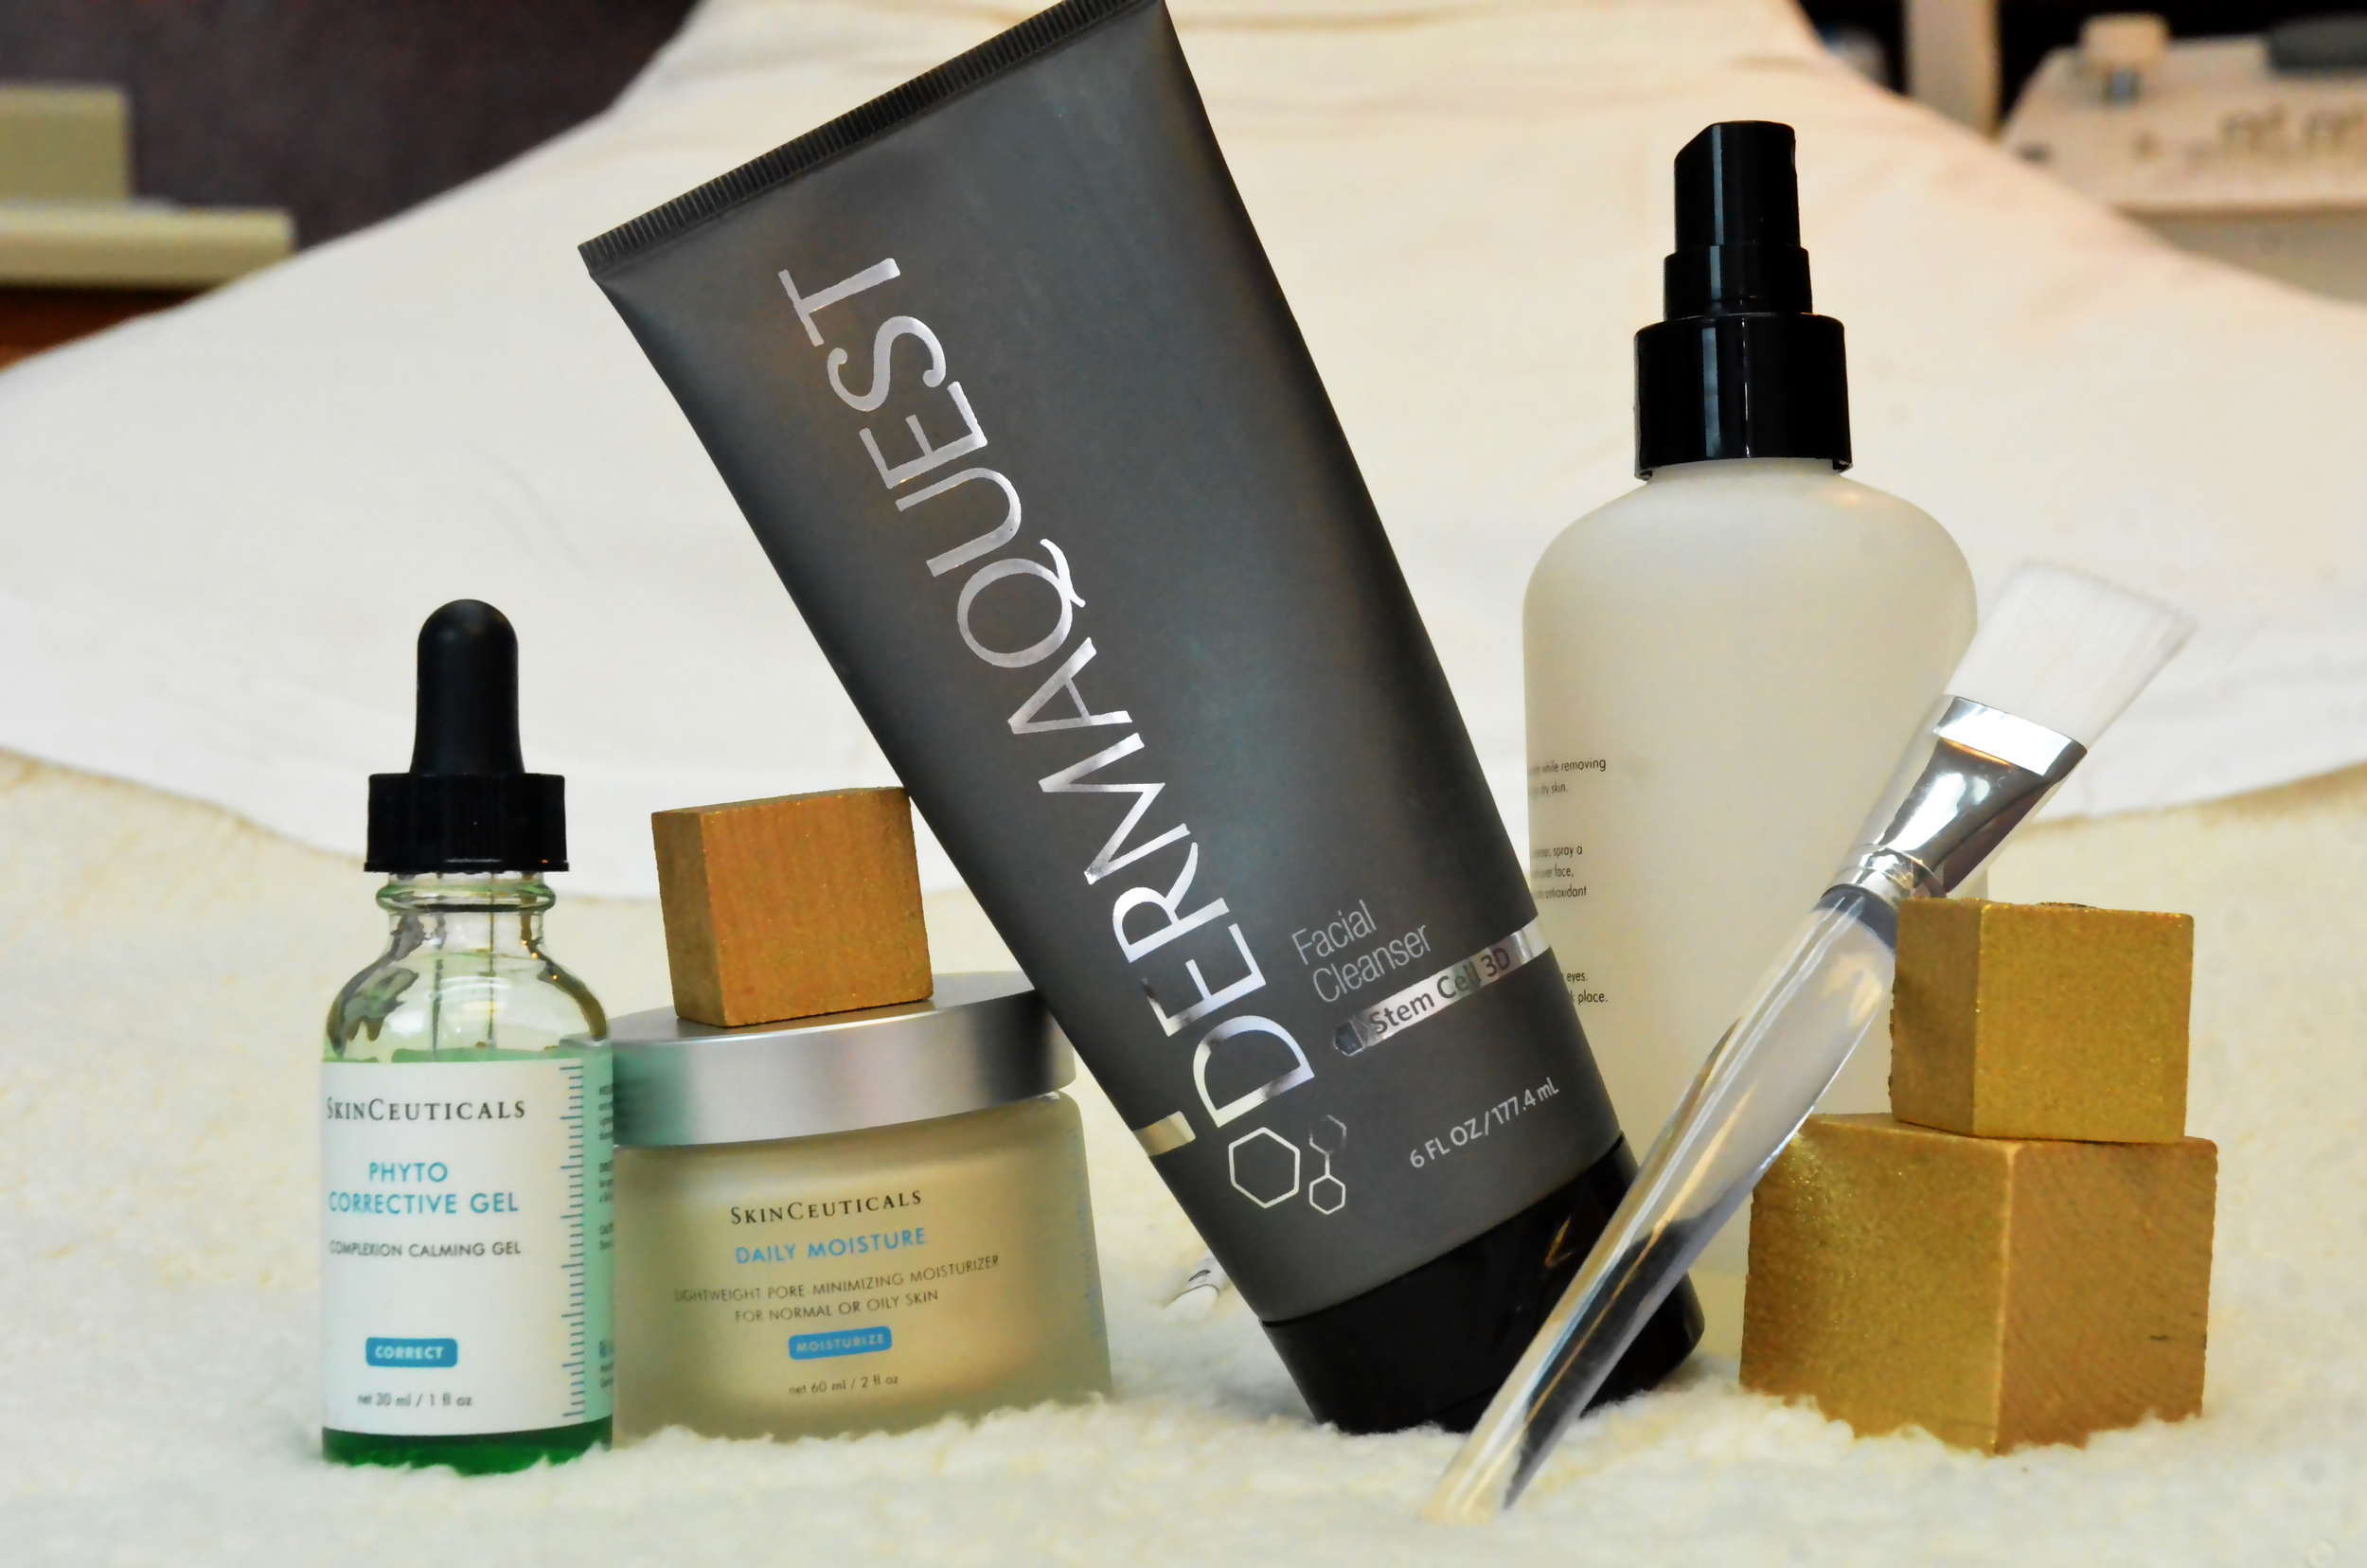 A mix of products from Dermaquest and SkinCeuticals